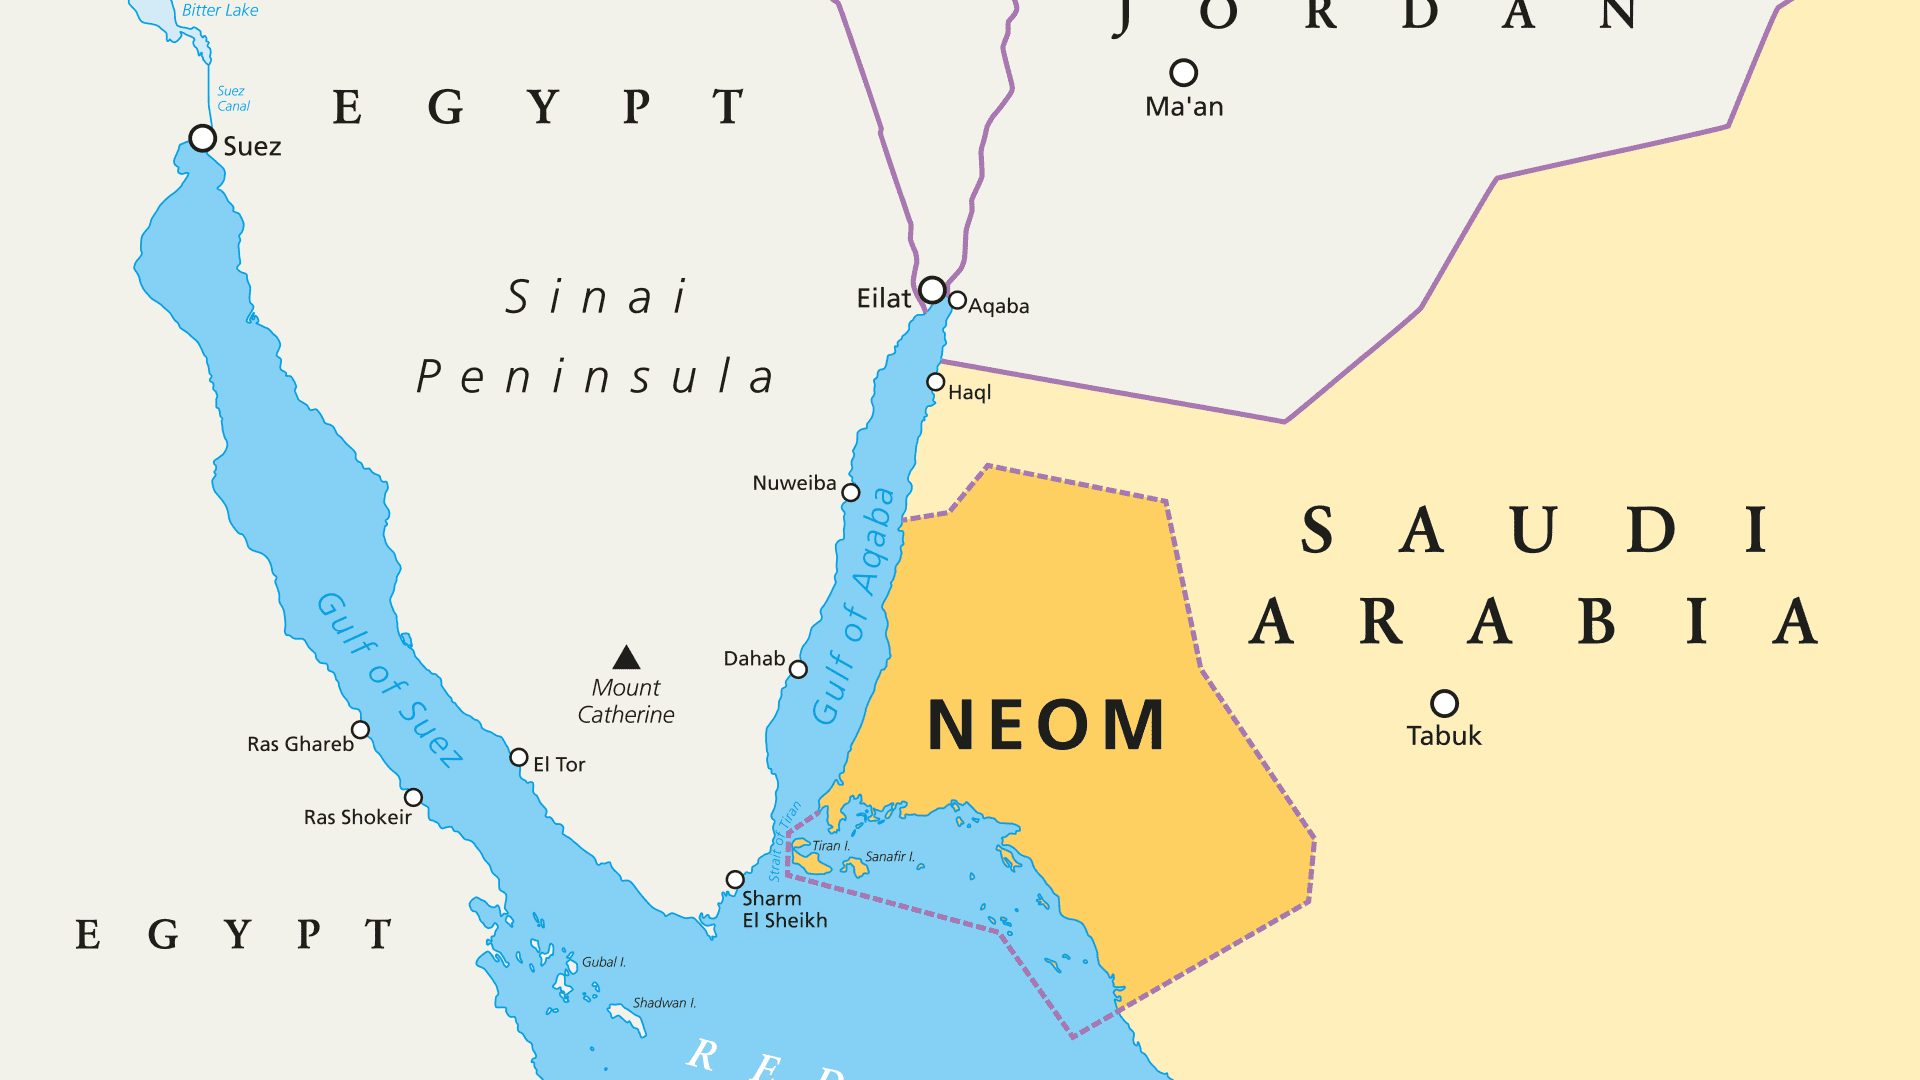 Saudi Arabia says all NEOM megaprojects will go ahead as planned despite reports of scaling back